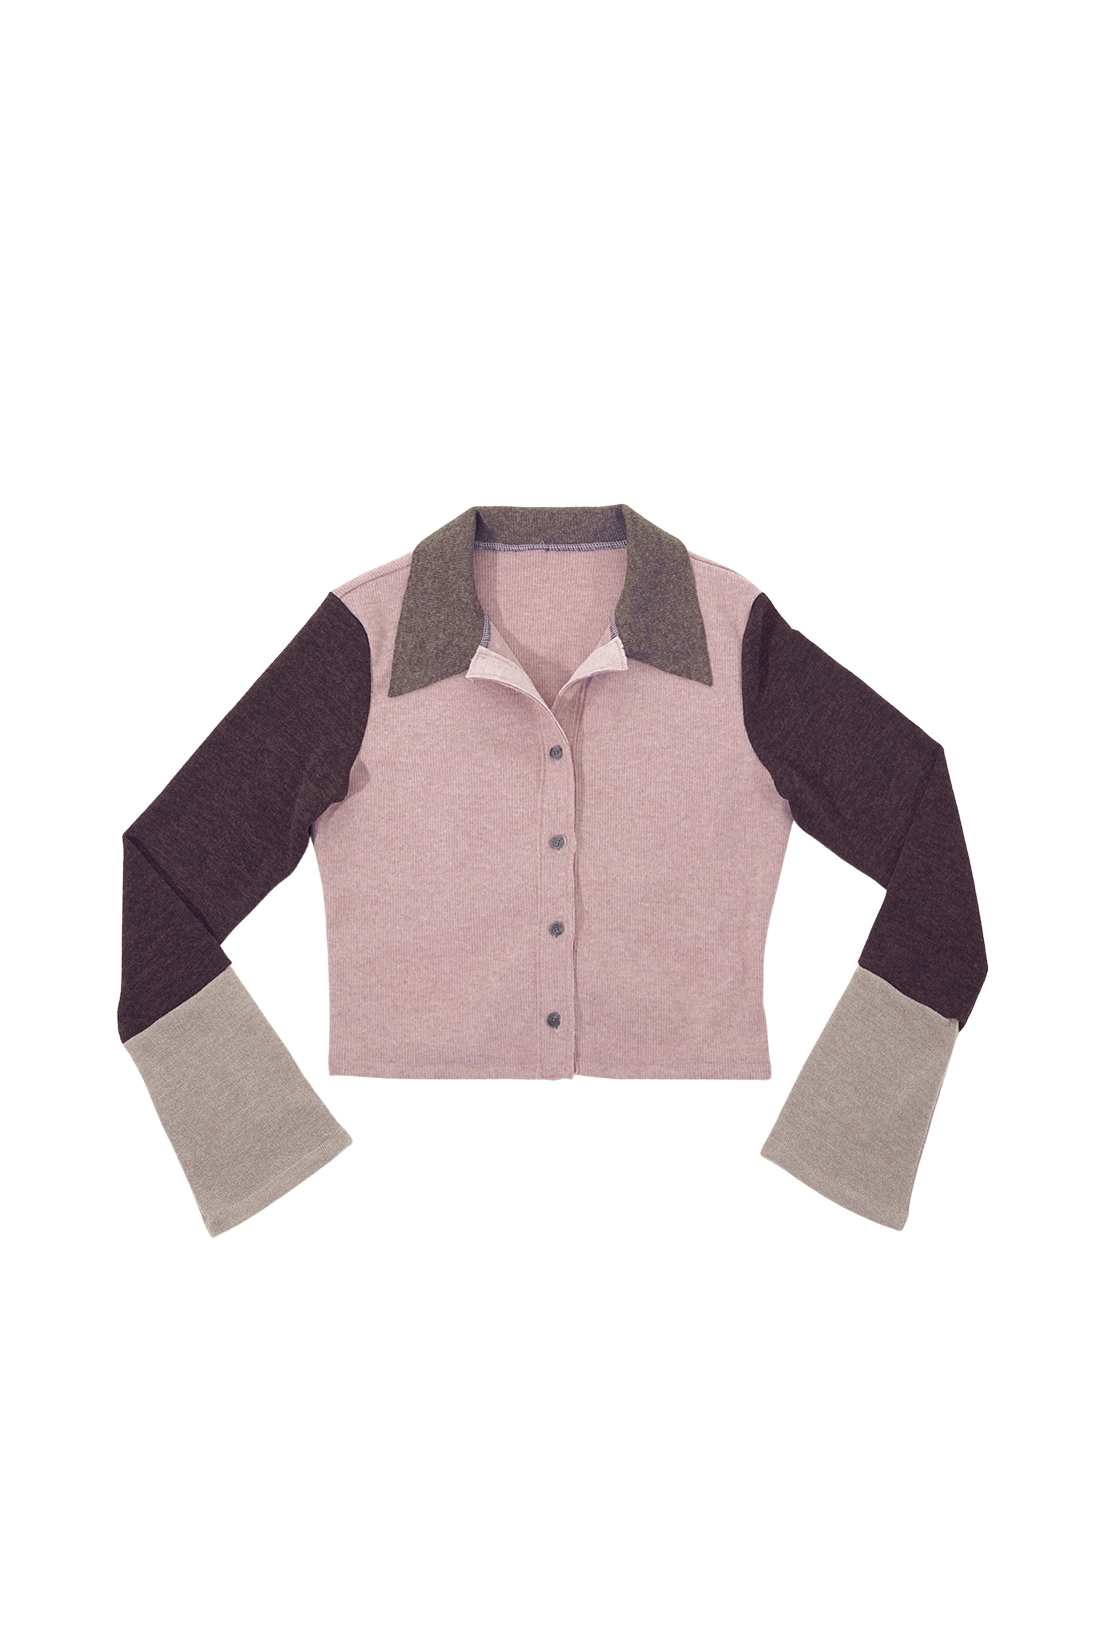 MULTICOLOR KNIT SHIRT # PINK BROWN